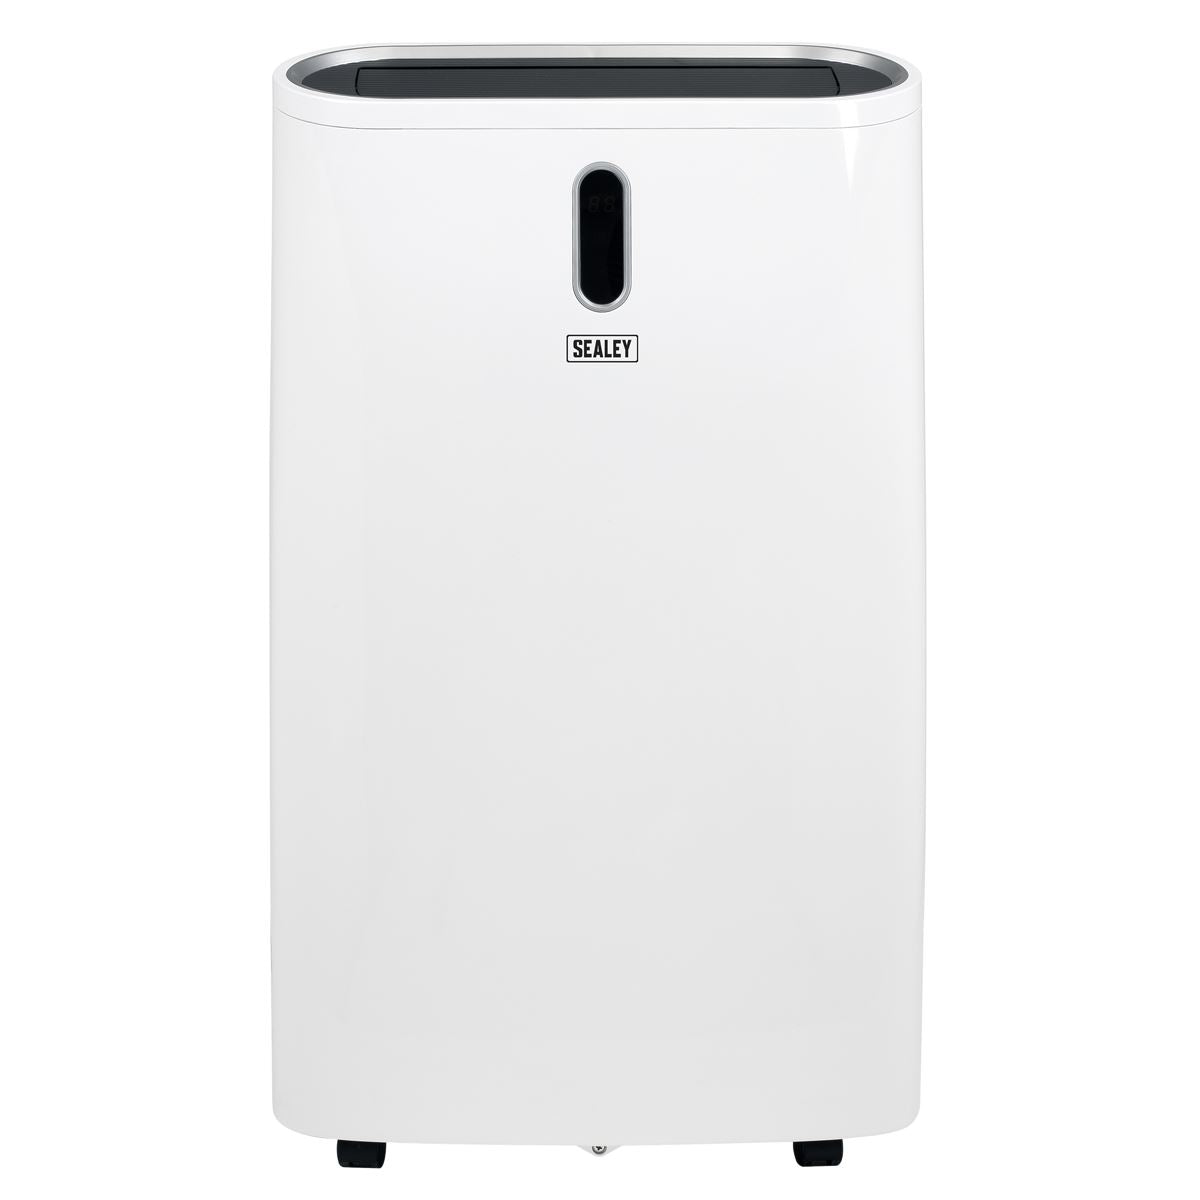 Sealey Portable Air Conditioner/Dehumidifier/Air Cooler/Heater with Window Sealing Kit 16,000Btu/hr